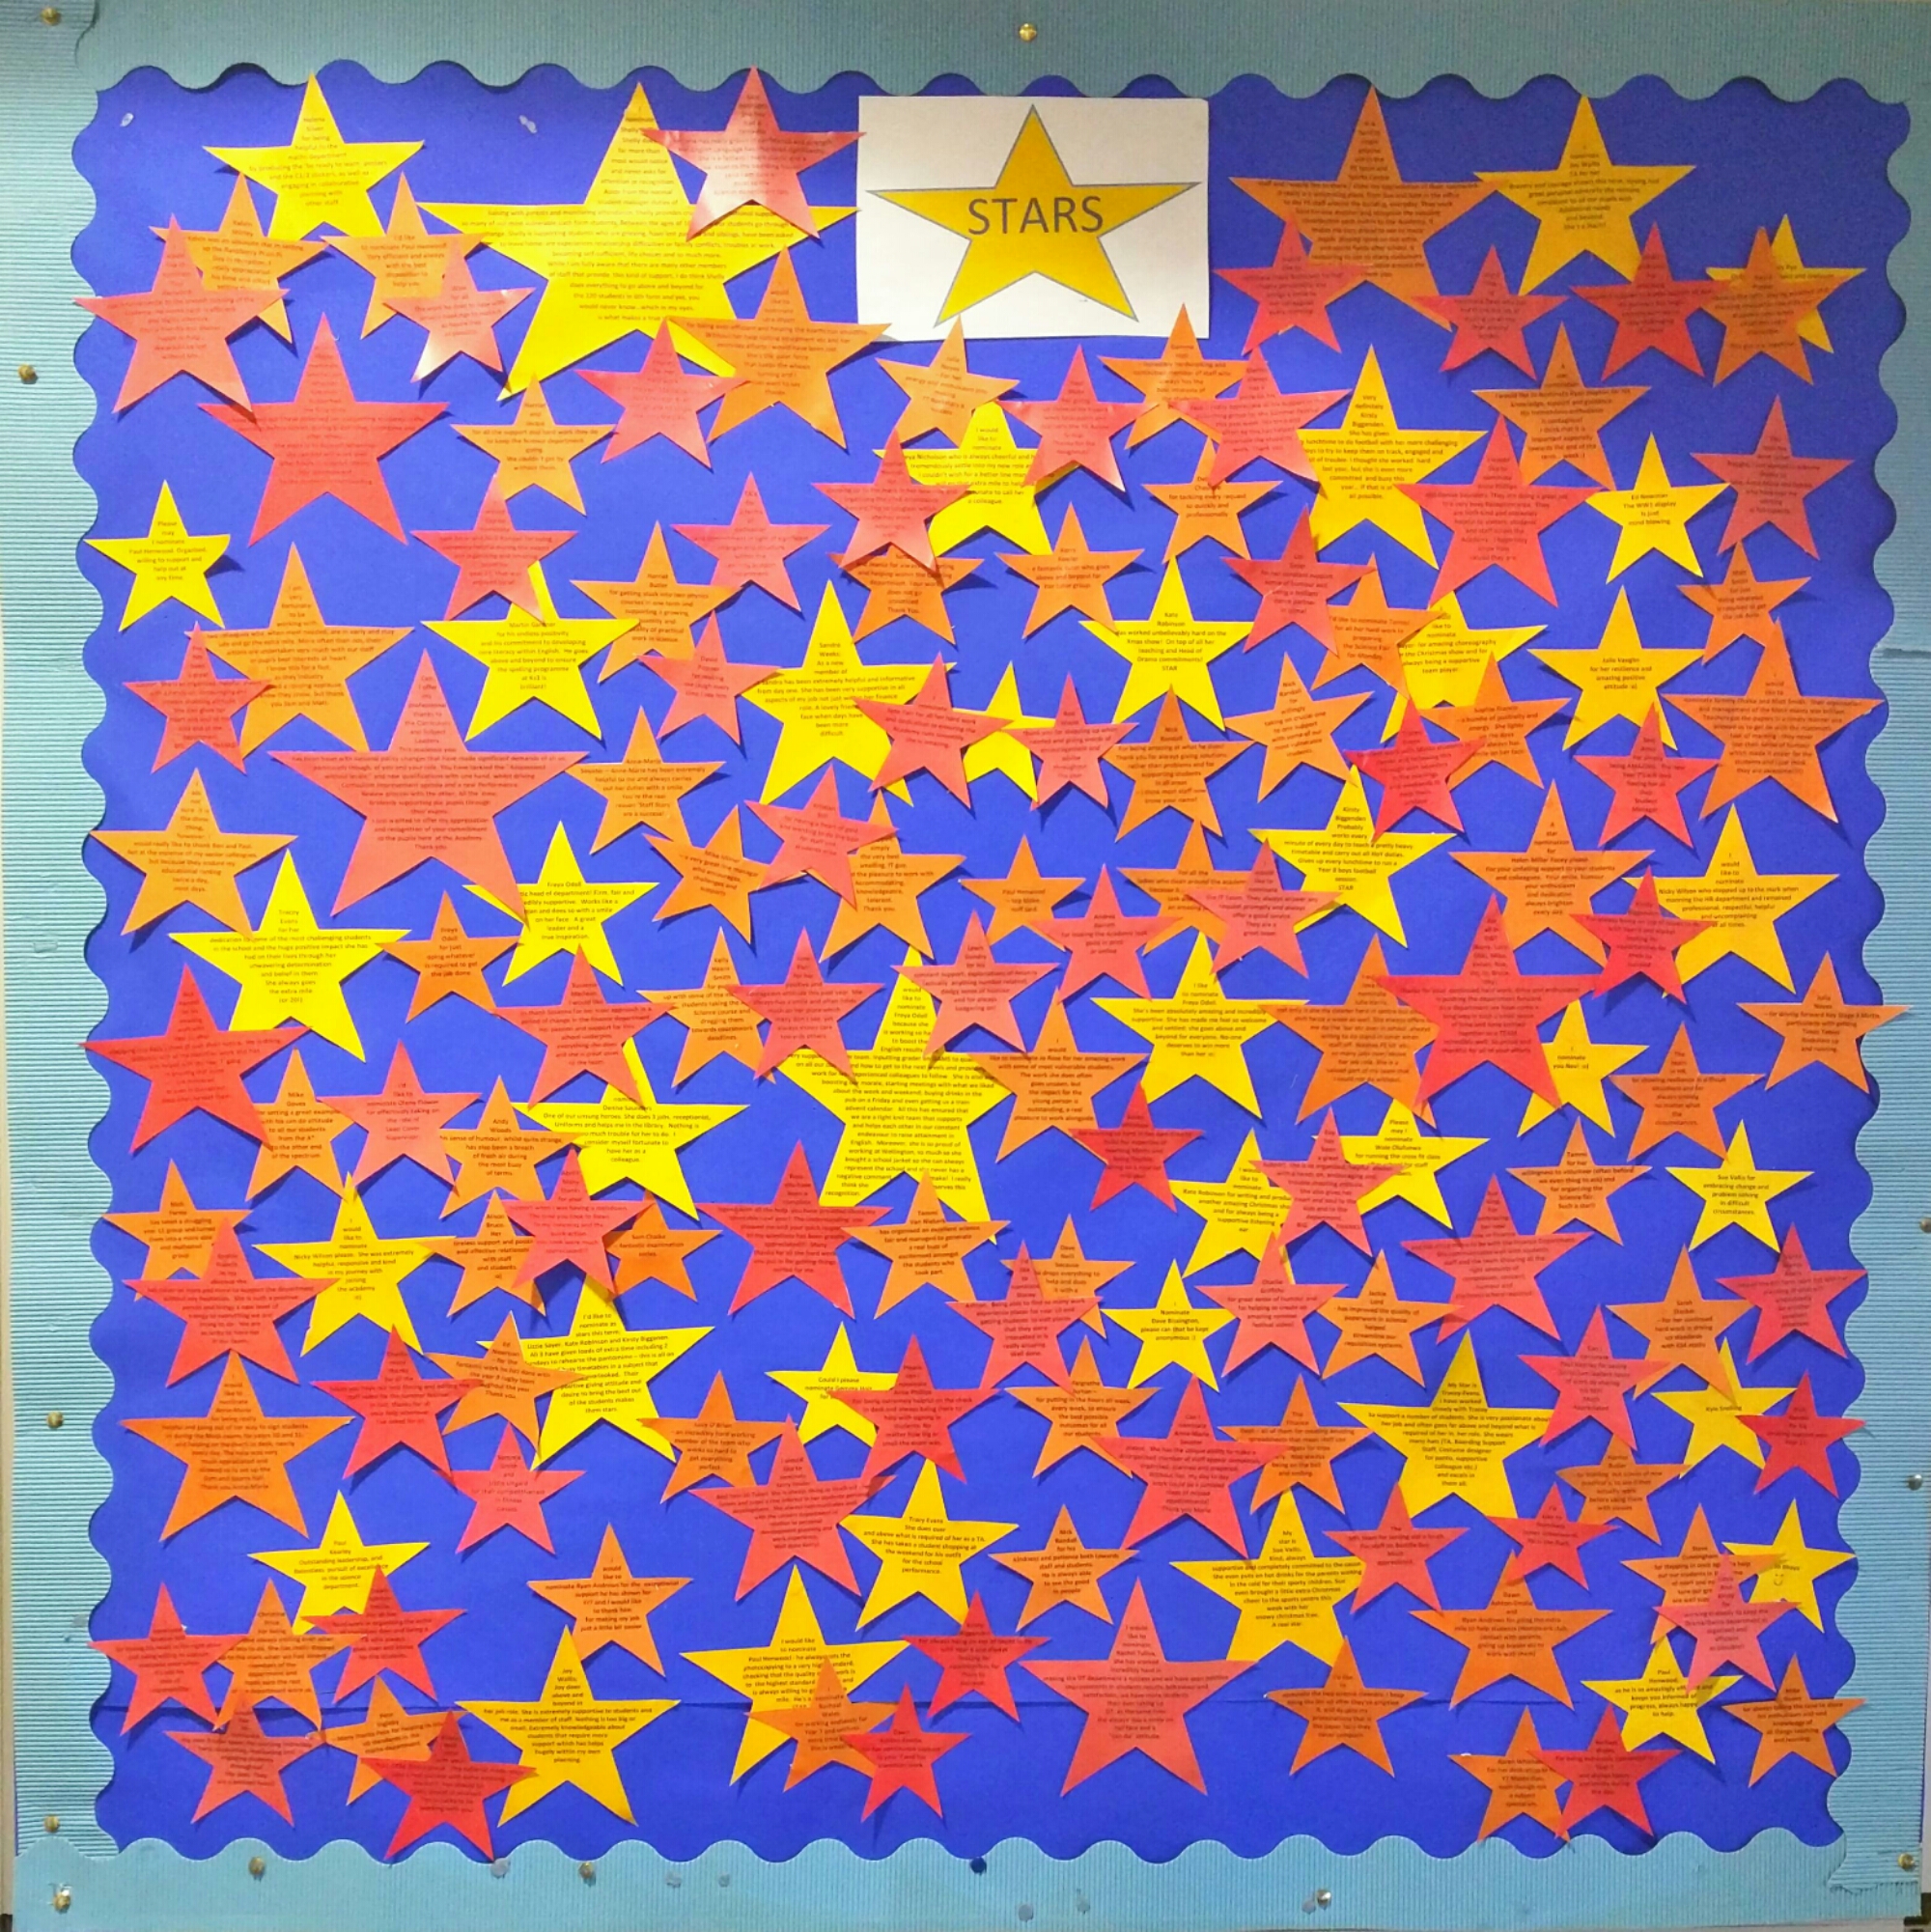 More stars – more recognition